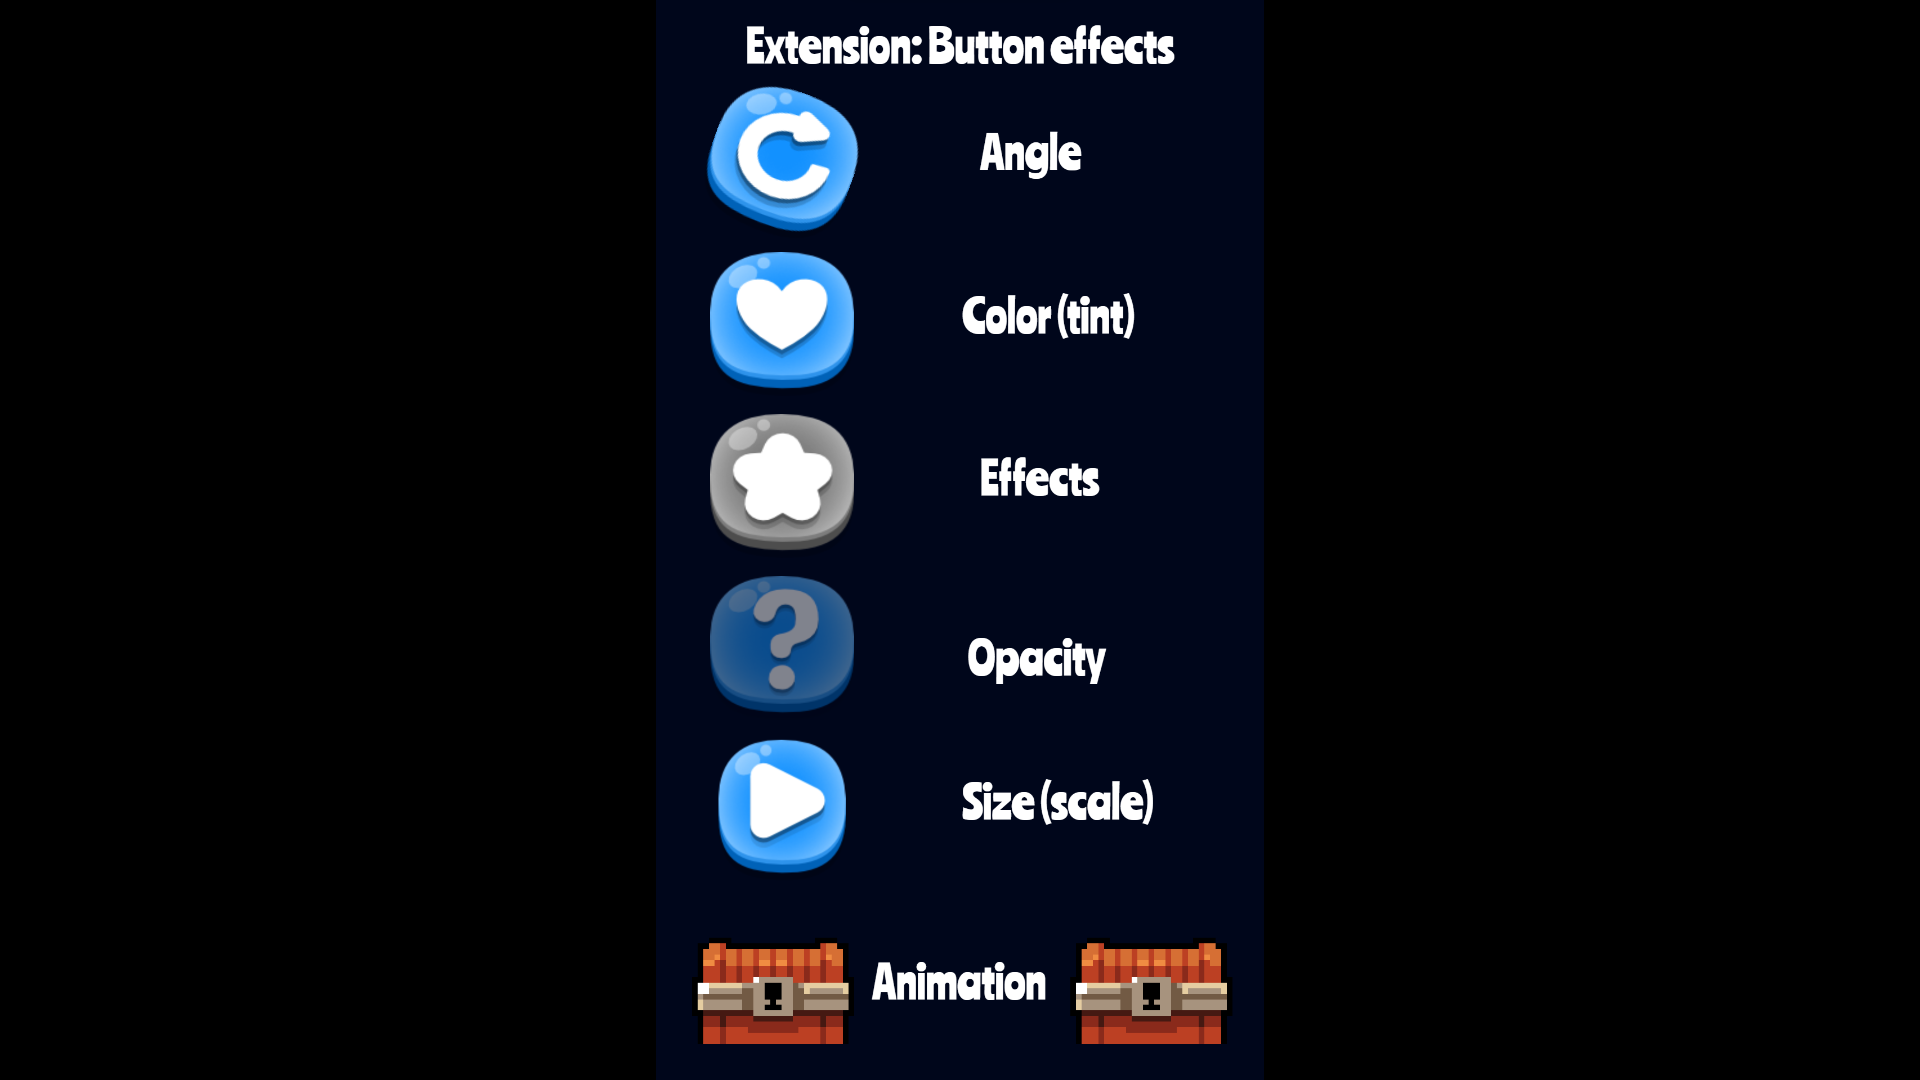 Button effects